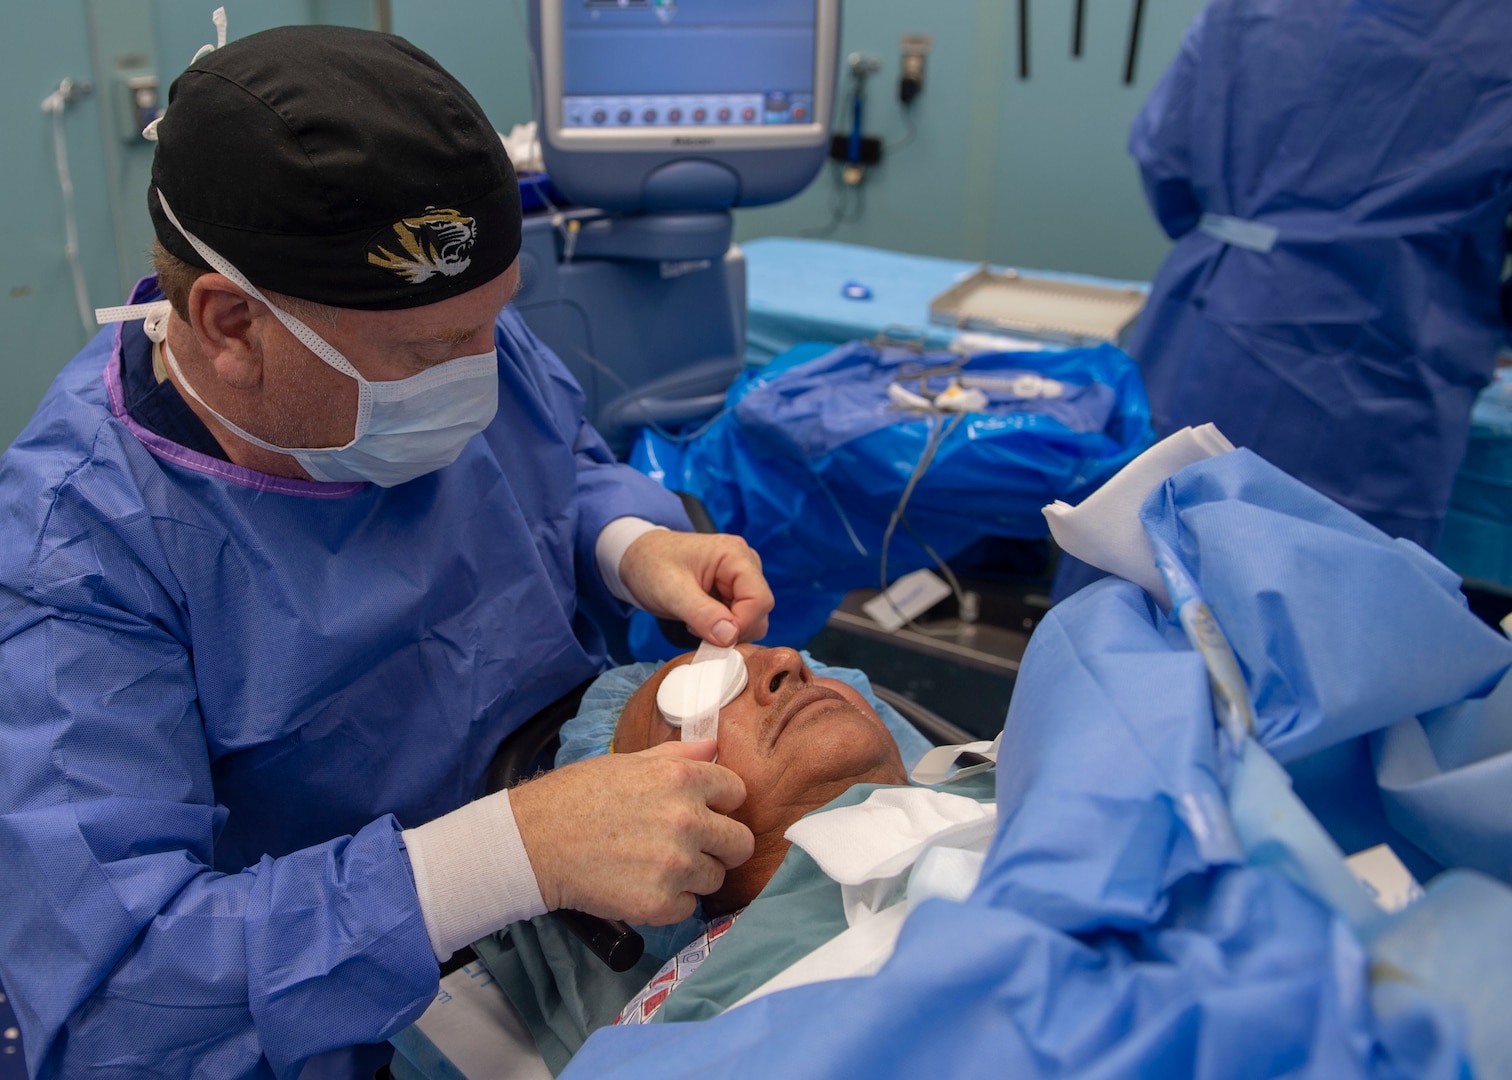 A surgeon wraps a patient’s eye after performing cataract surgery in an operating room aboard the hospital ship USNS Comfort.